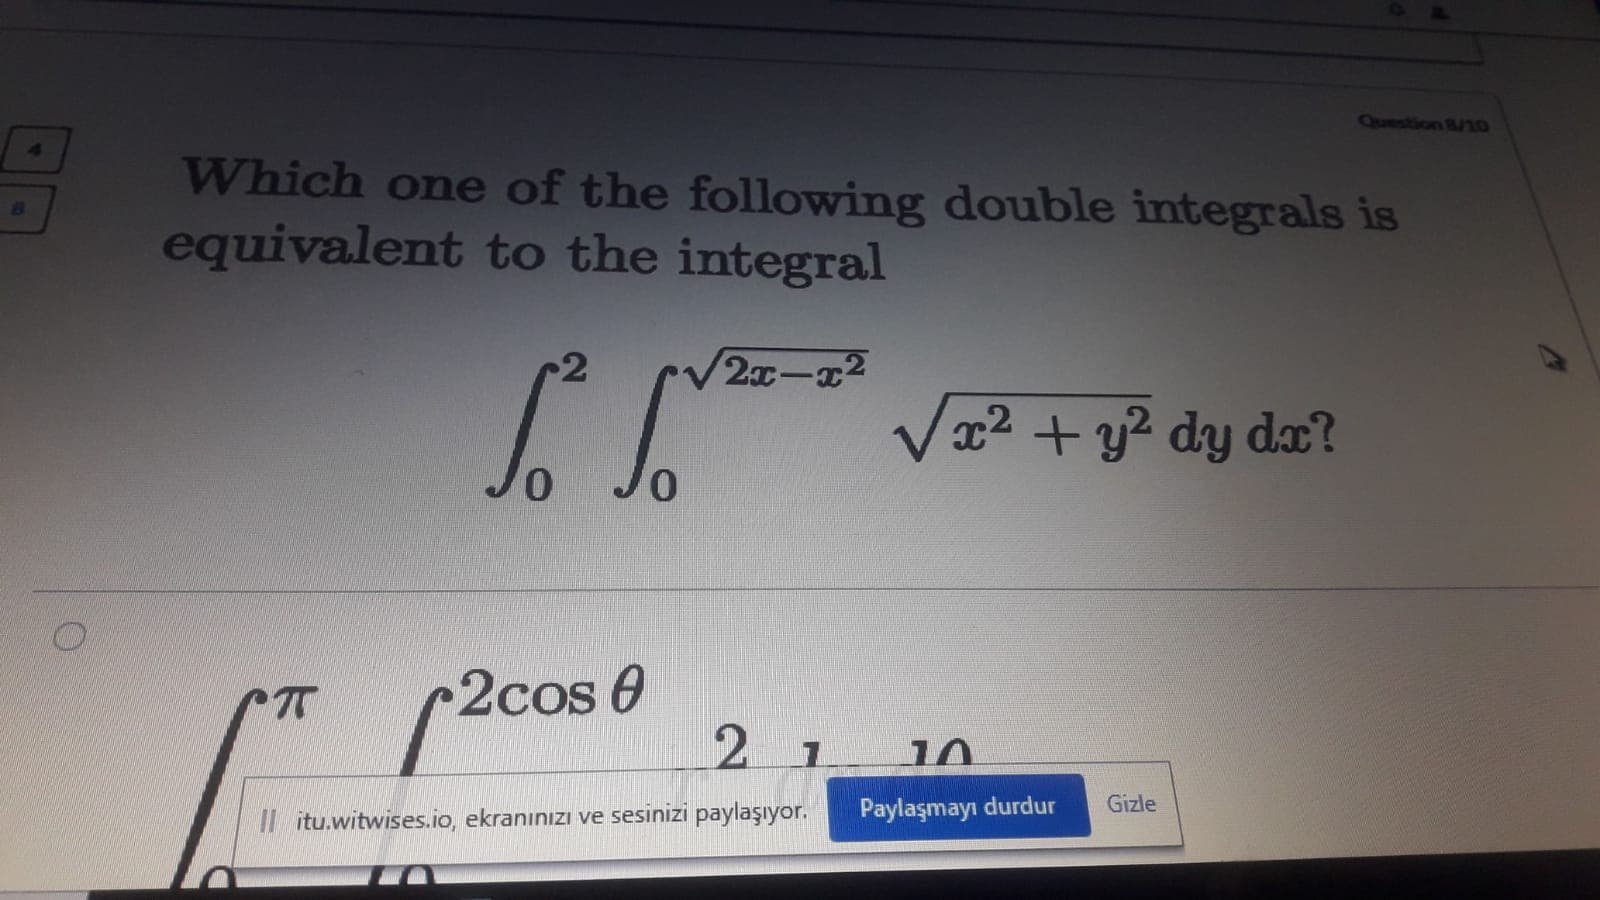 Which one of the following double integrals is
equivalent to the integral
2x-x2
Vx2 + y2 dy dx?
0.
0.
